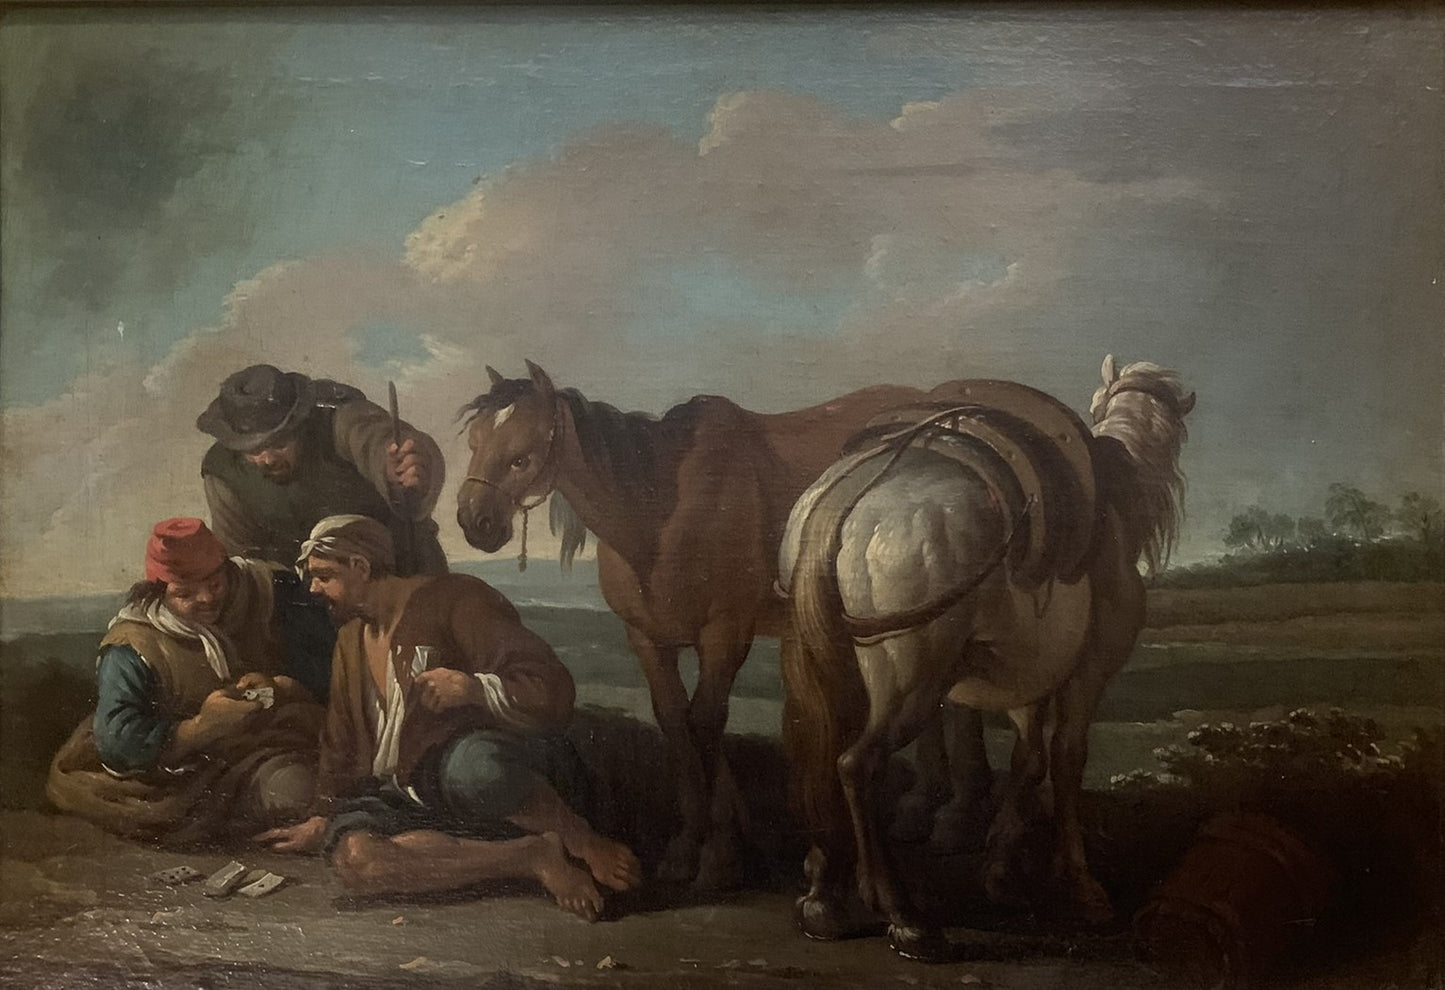 Paolo Monaldi. 2 paintings. "A stopover in the countryside" and "A game of cards". Circa 1740